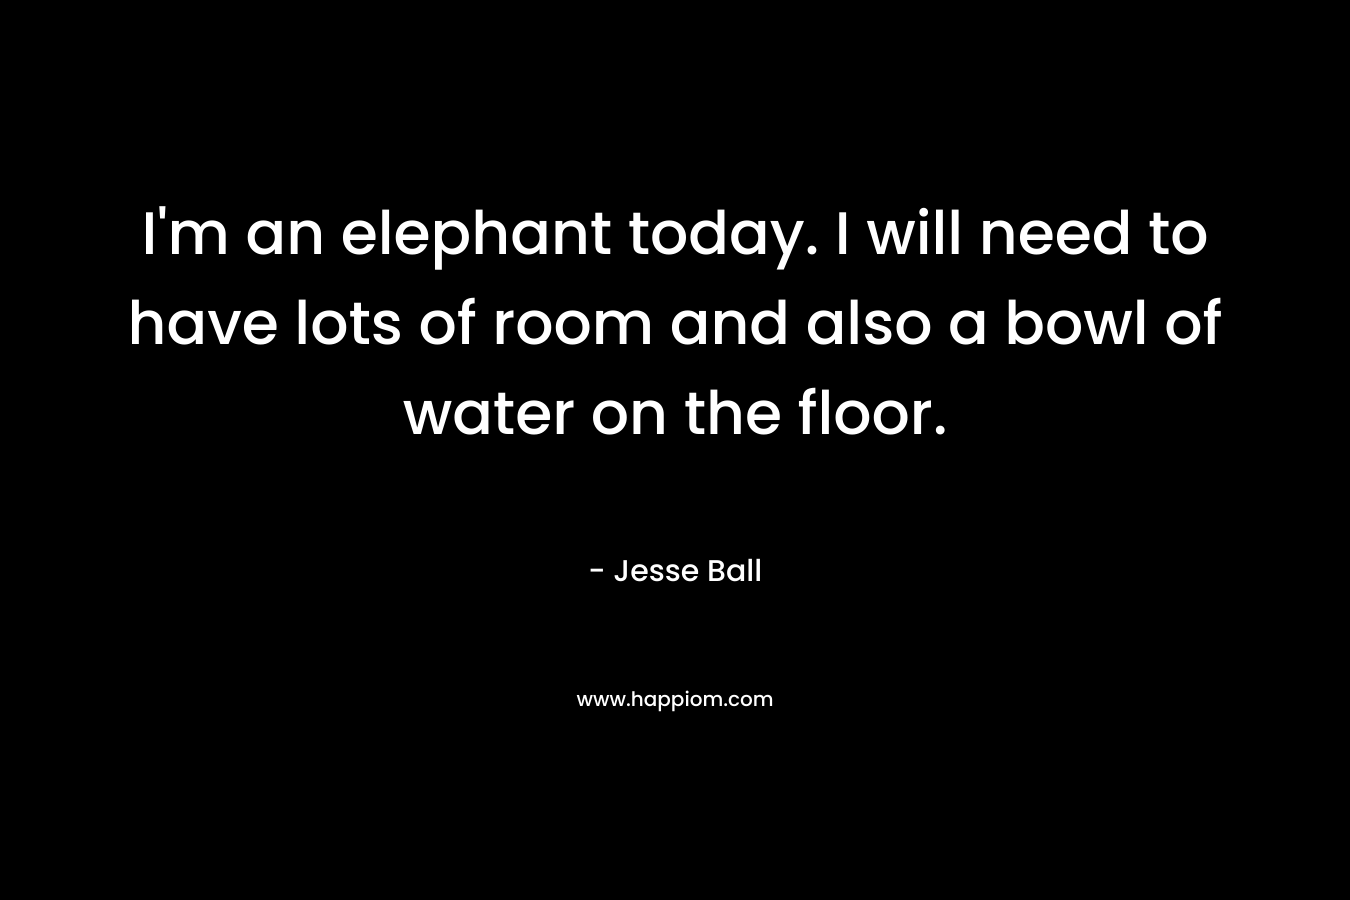 I'm an elephant today. I will need to have lots of room and also a bowl of water on the floor.